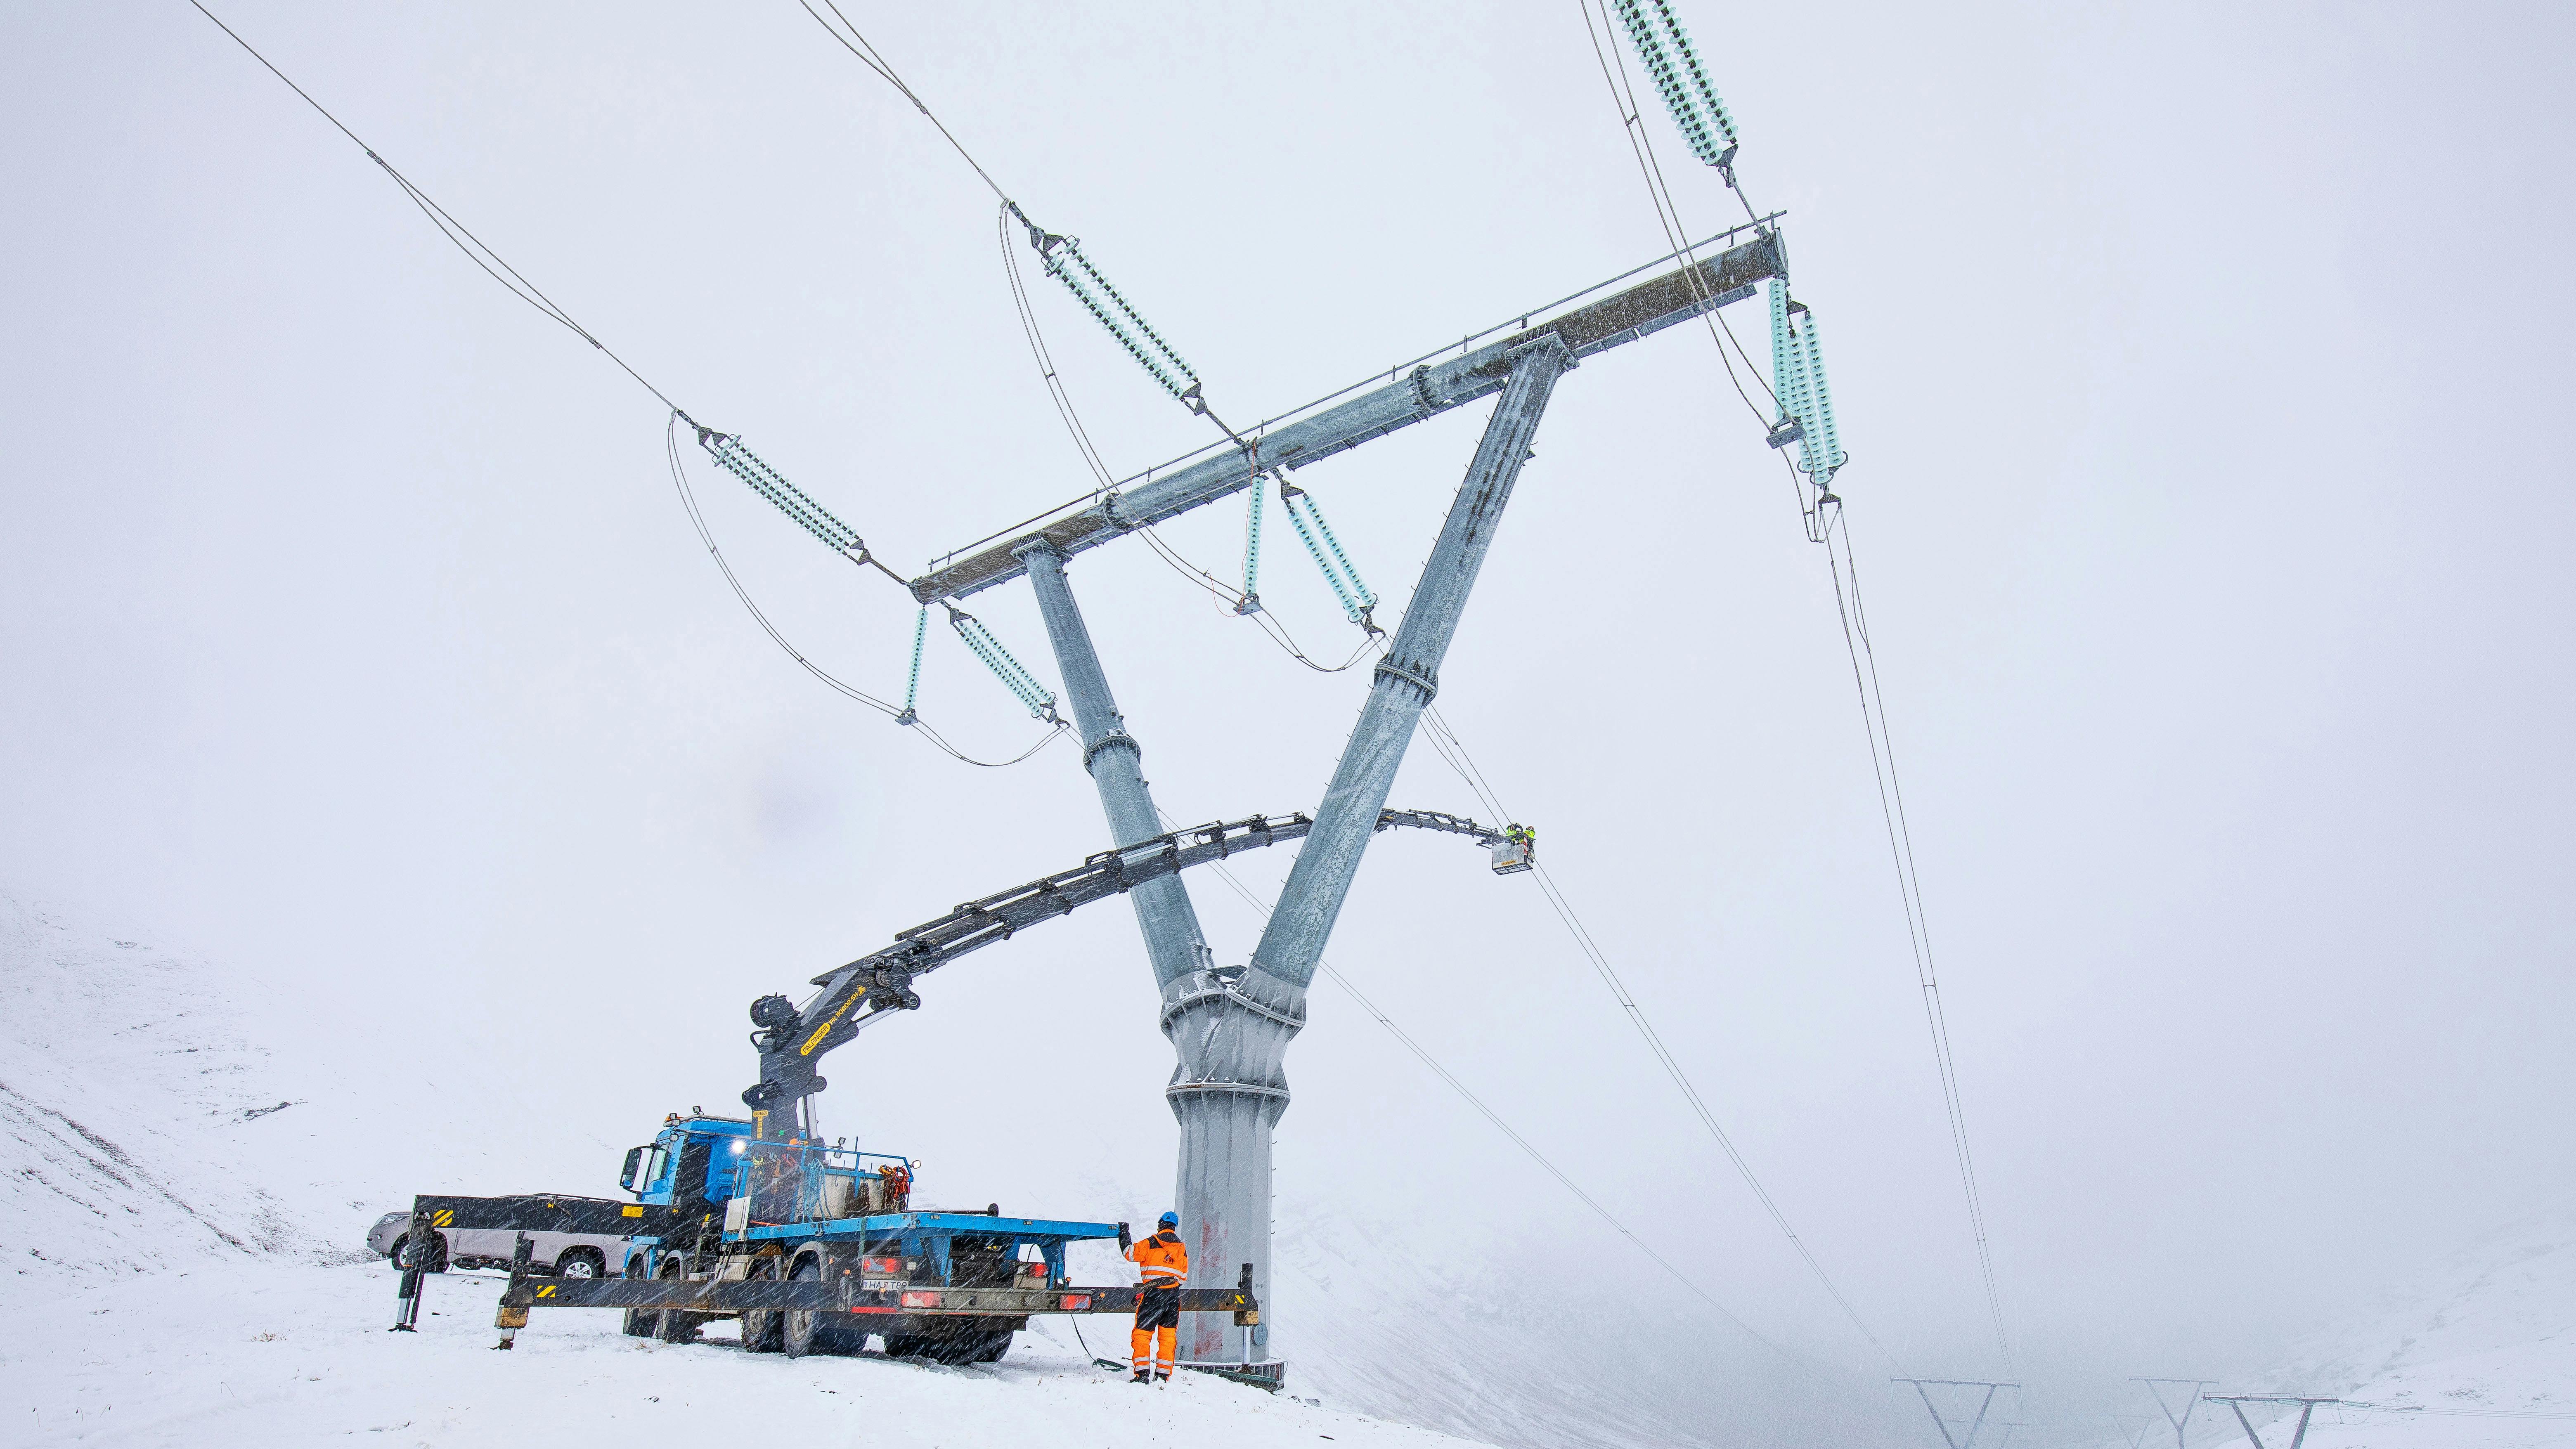 Installation of a Laki Power monitoring station in Iceland